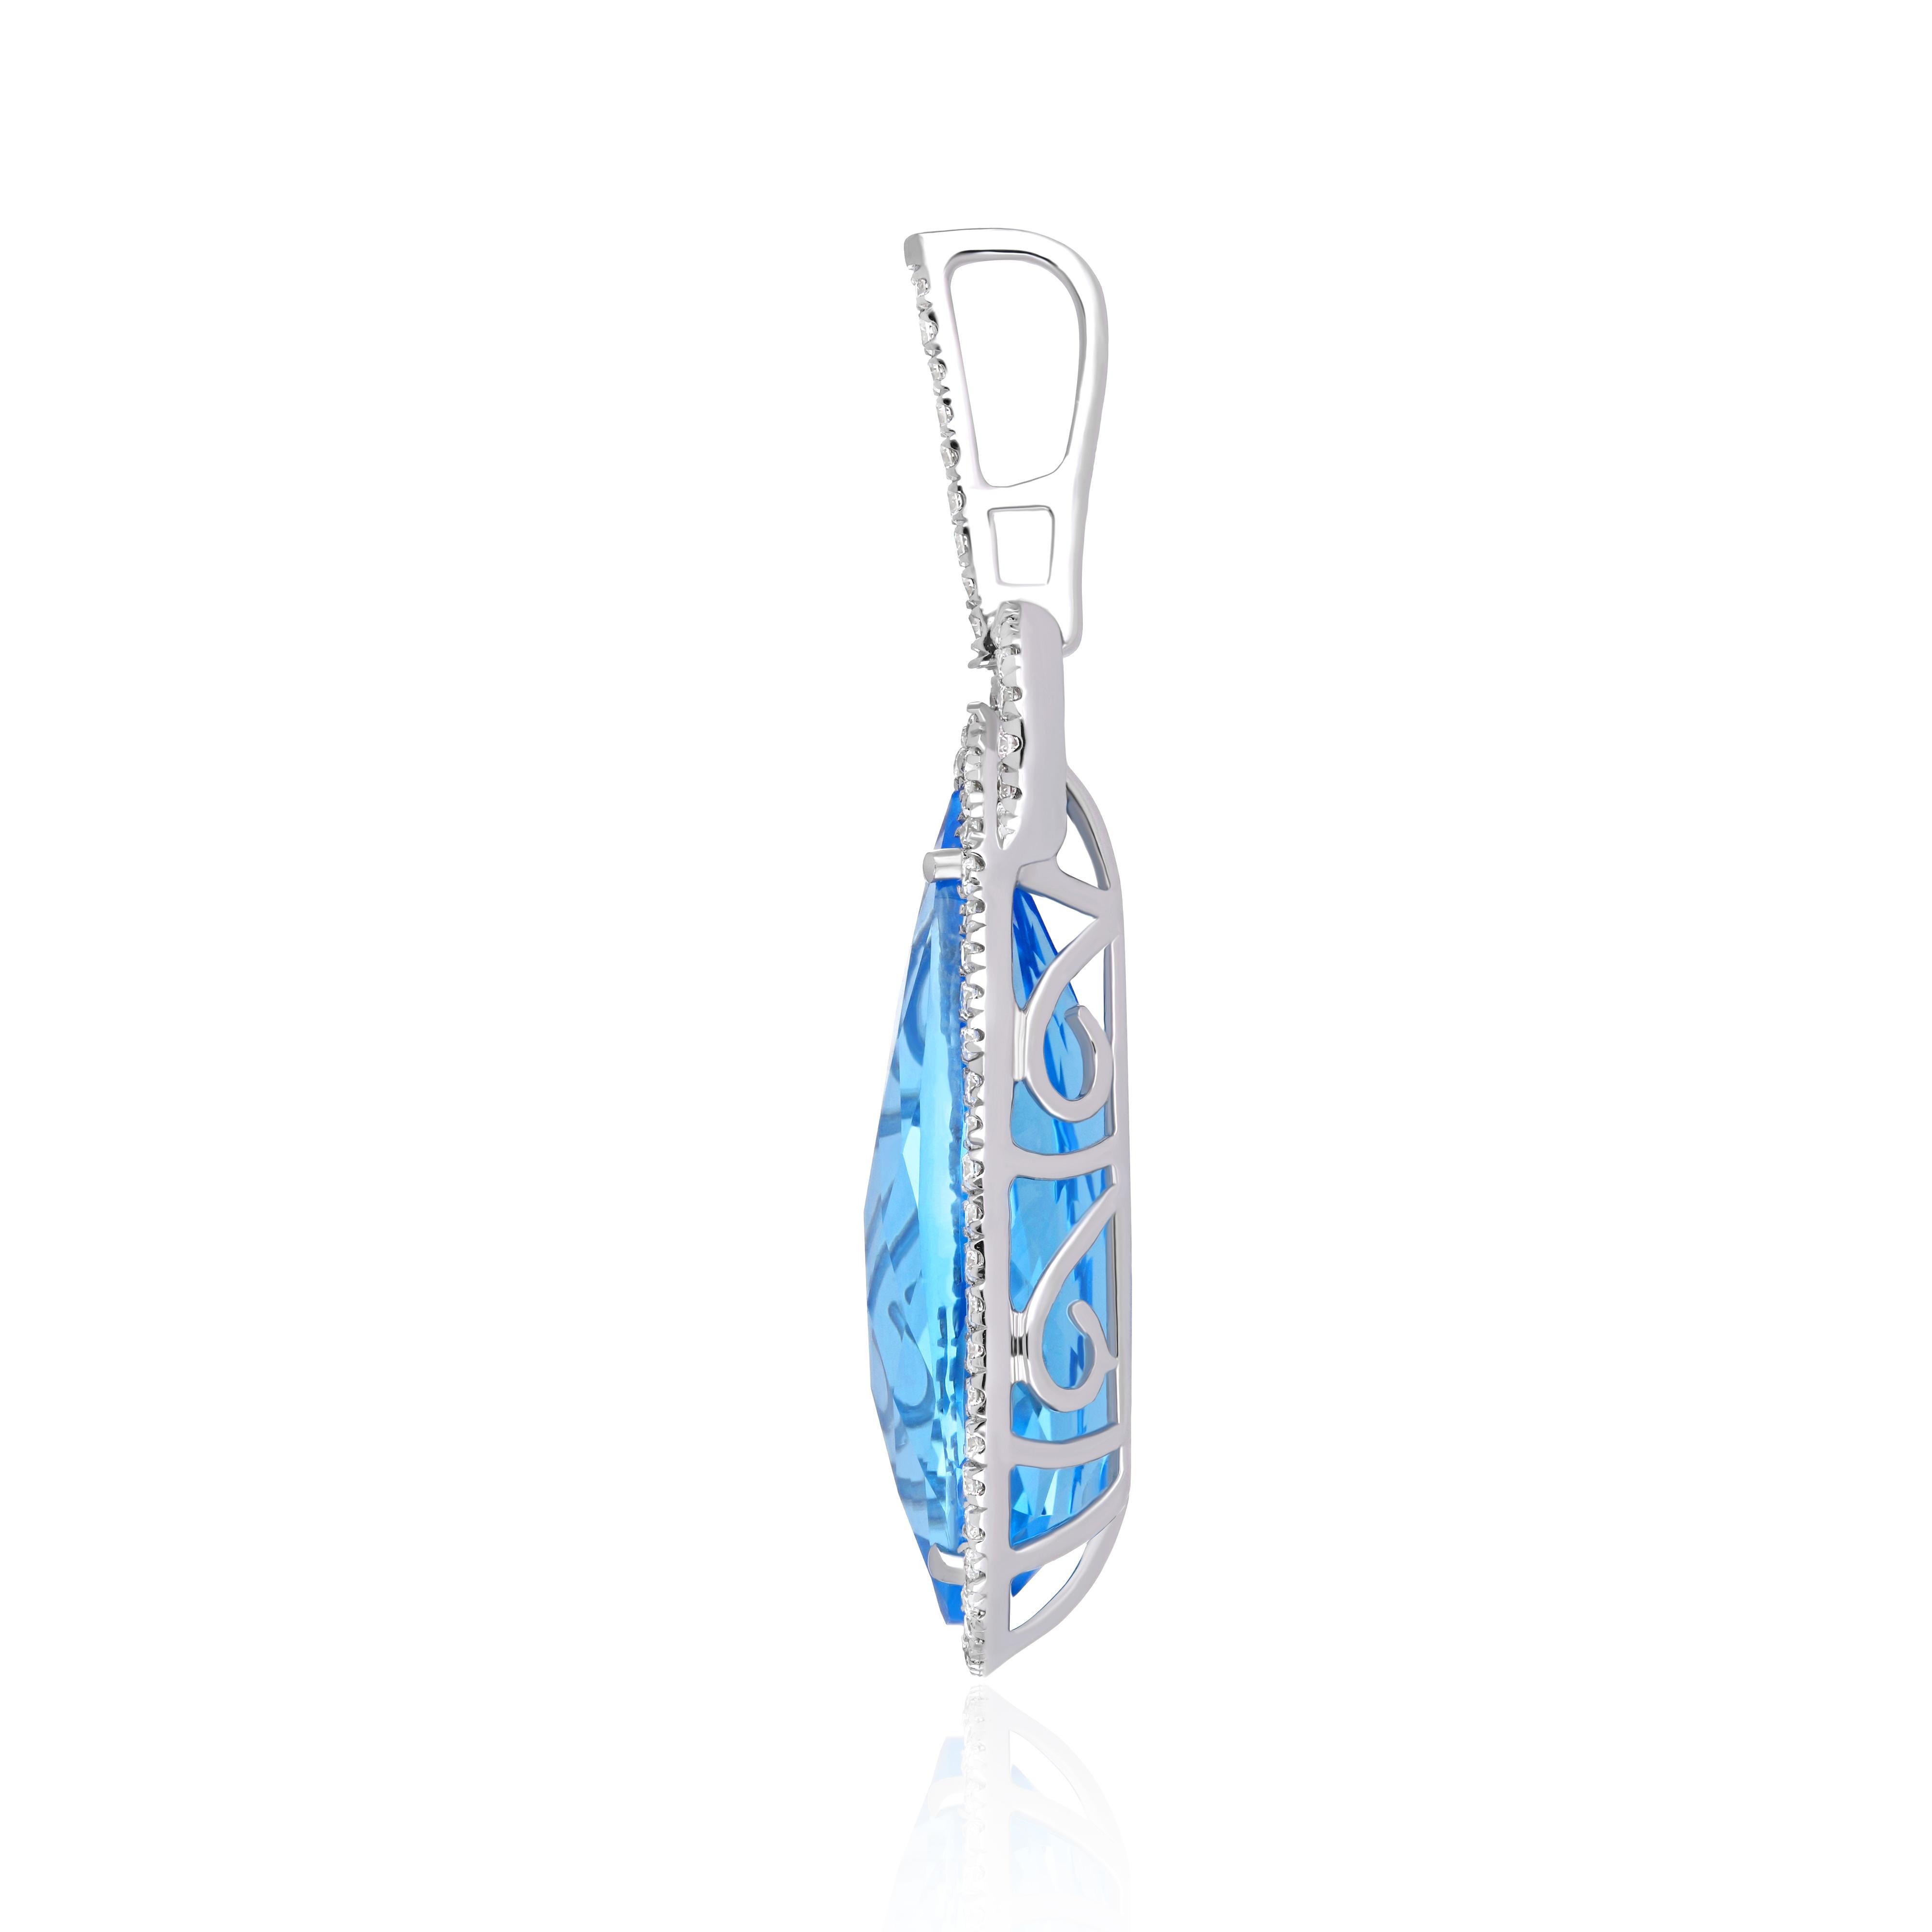 Elegant and exquisitely detailed Cocktail 14 Karat White Gold Pendant, center set with 10.18Cts. (approx.) Elongated Pear Cut Swiss Blue Topaz. Surrounded with micropave set Diamonds, weighing approx. 0.33 Cts. Beautifully Hand crafted in 14 Karat